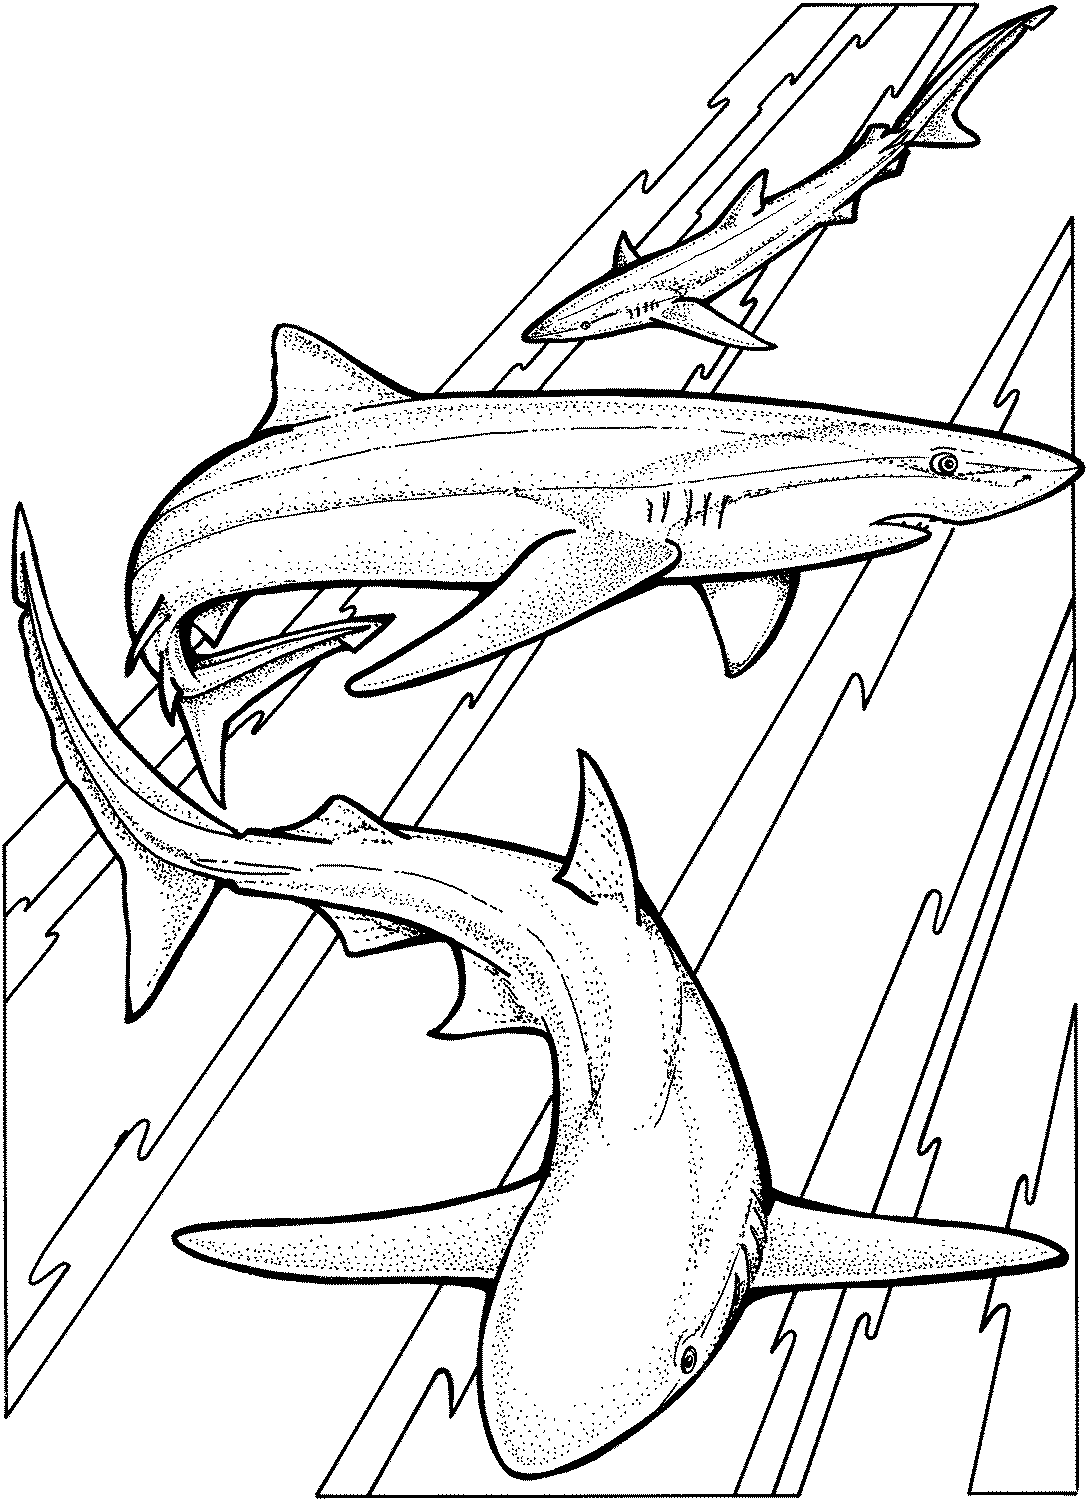 bull shark coloring pages realistic shark coloring pages at getcoloringscom free coloring shark pages bull 